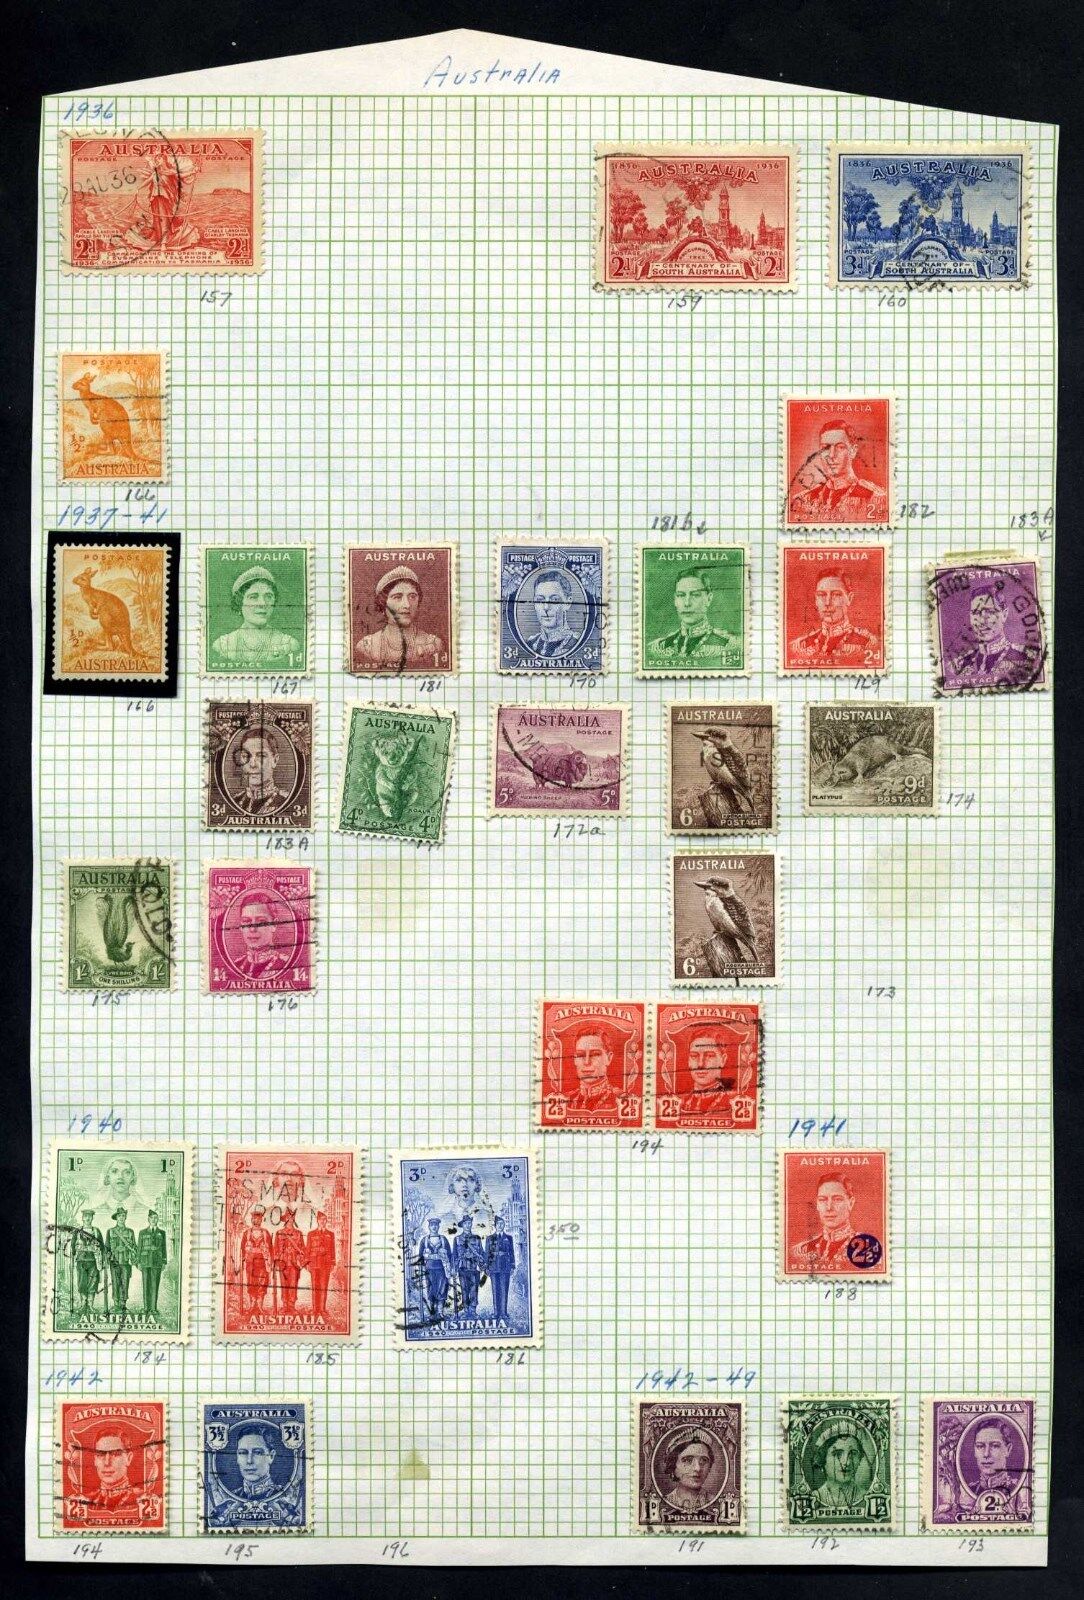 Lot of 55 Early (1936-1950s) Australia Collection of Stamps Без бренда